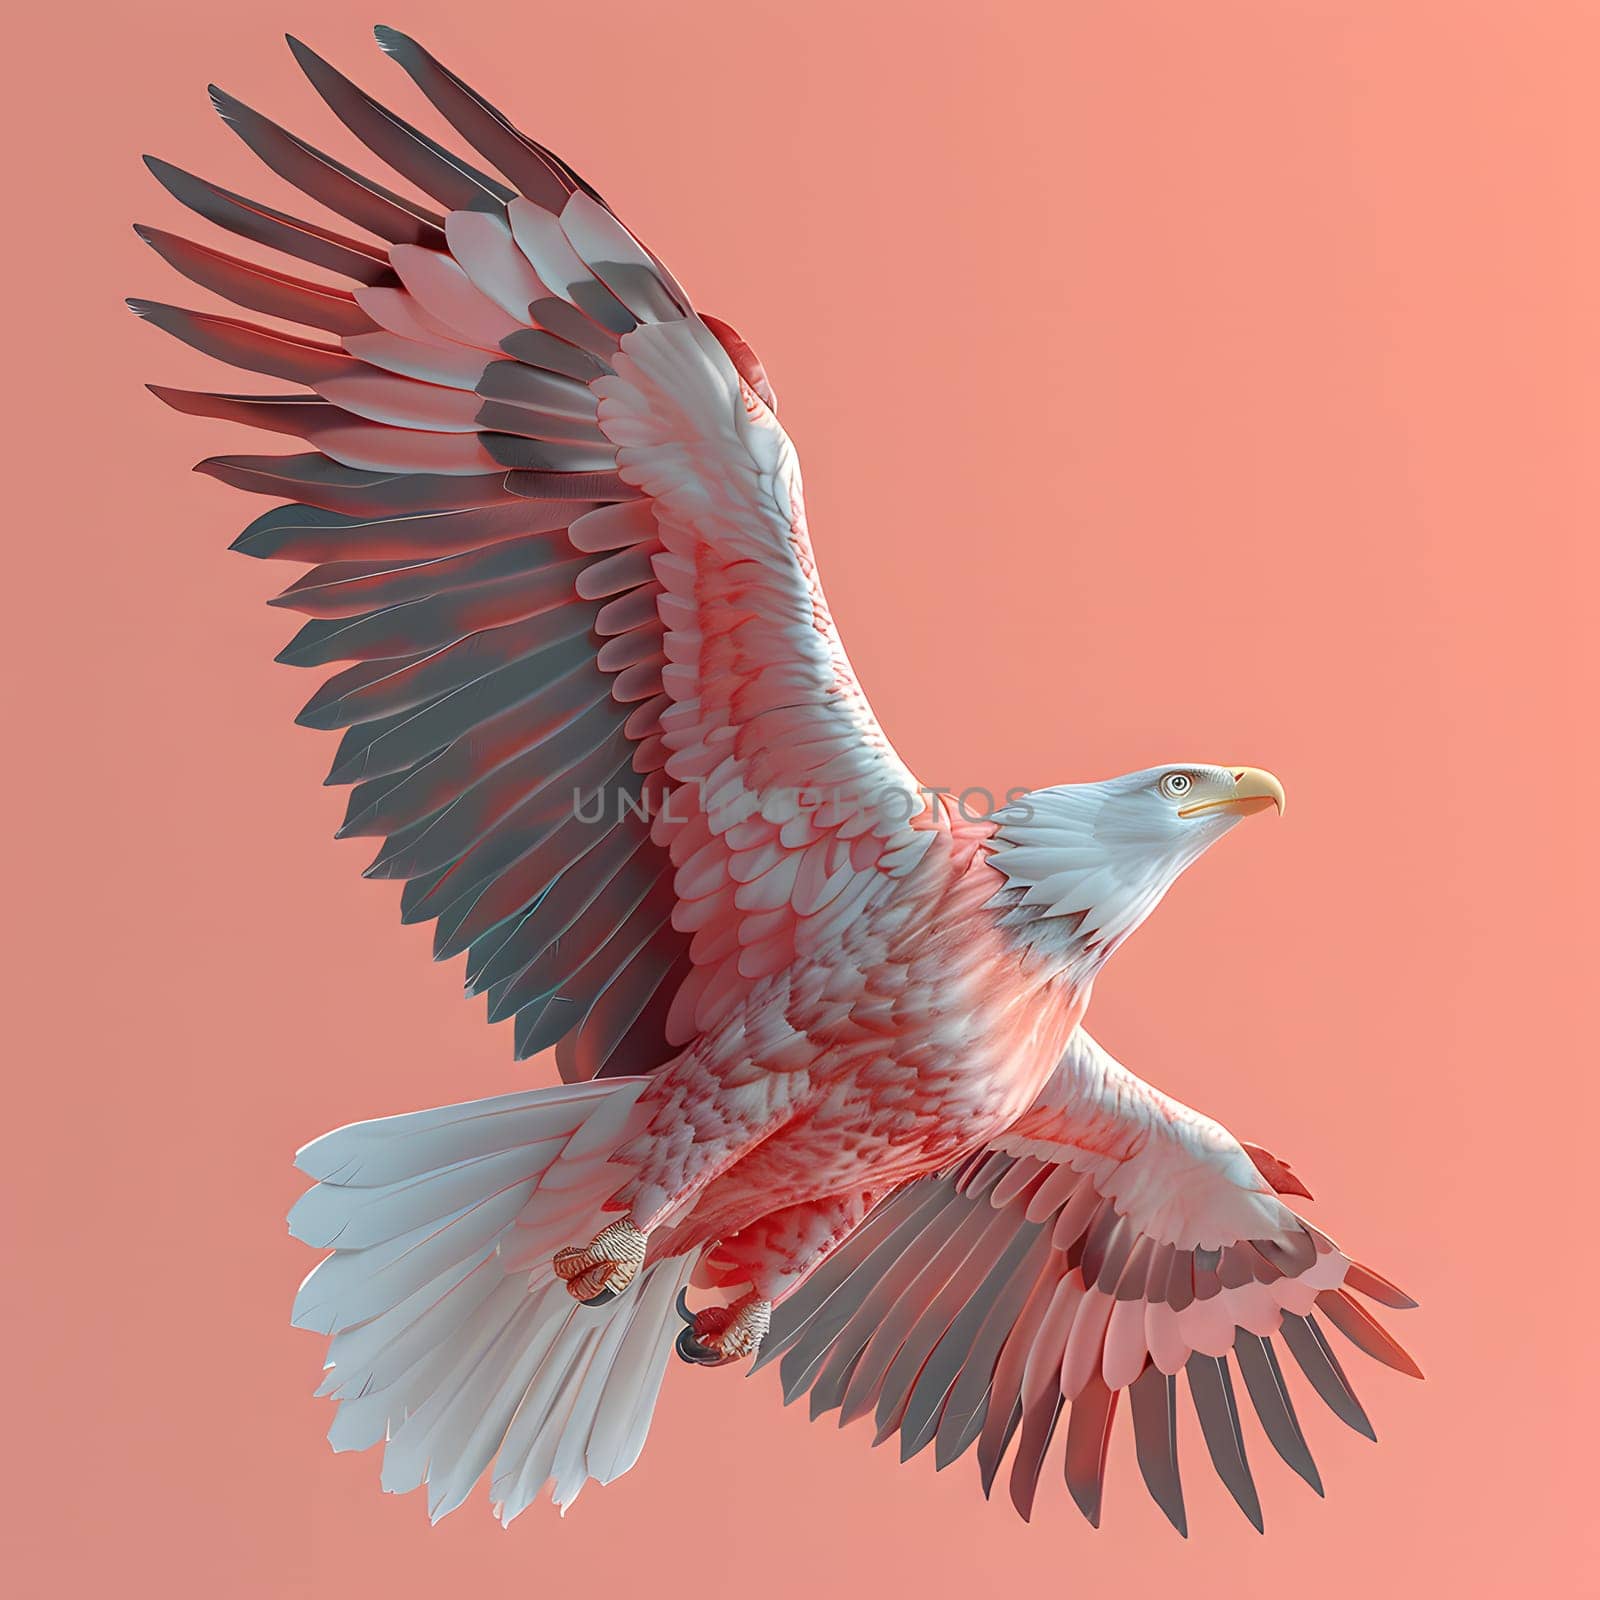 A magnificent bird with pink and white feathers, an elegant beak, and majestic wings outstretched flies through the sky. Its tail sways gracefully as it soars, a masterpiece of natures creative arts